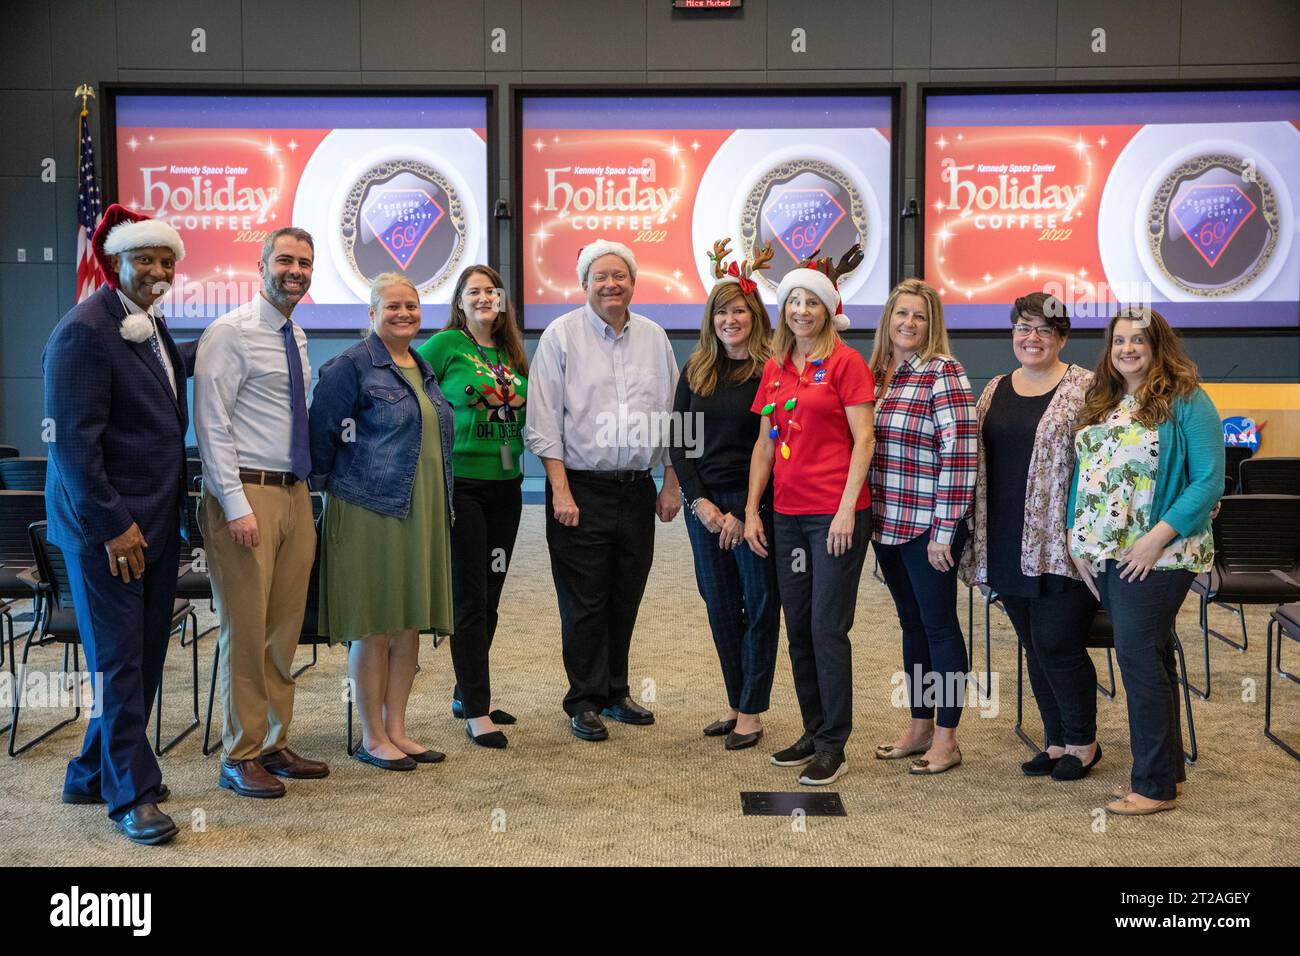 2022 Holiday Coffee. Kennedy Space Center Director Janet Petro, fourth from right, poses with other center leaders and support staff during the 2022 Center Director’s Holiday Coffee on Dec. 7, 2022, at NASA’s Kennedy Space Center in Florida. From left are Deputy Director Kelvin Manning; Kennedy Space Center employees Michael Haddad, Maggi Dutczak, and Cindy Rymer; Associate Director Technical Burt Summerfield; Associate Director Operations Jennifer Kunz; Petro; Kennedy employees Heidi Culp, Amber Chieffe, and Amanda Hayes. The annual holiday event is an opportunity for Kennedy employees and NA Stock Photo